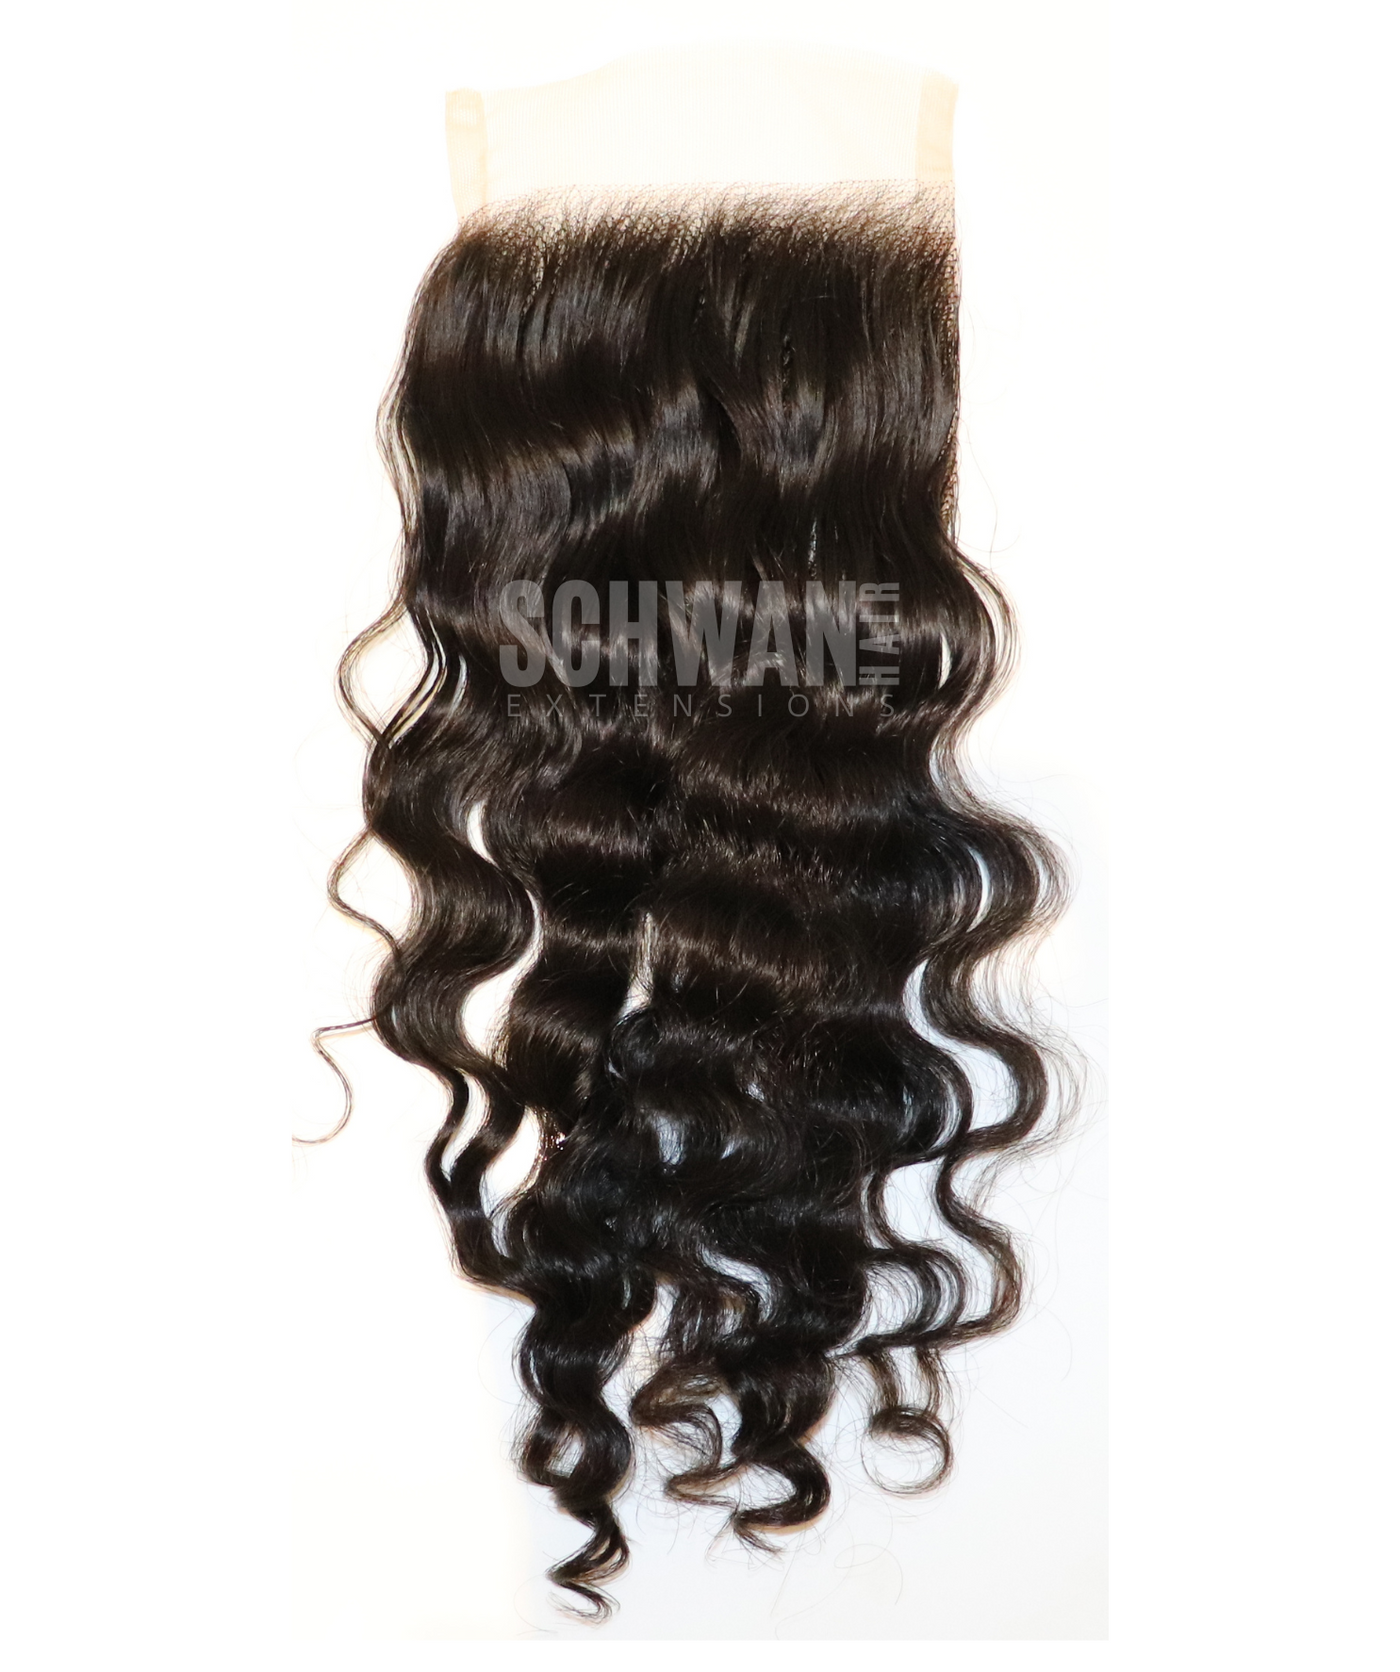 Raw Indian Natural Curly 5x5 Swiss Lace Closure